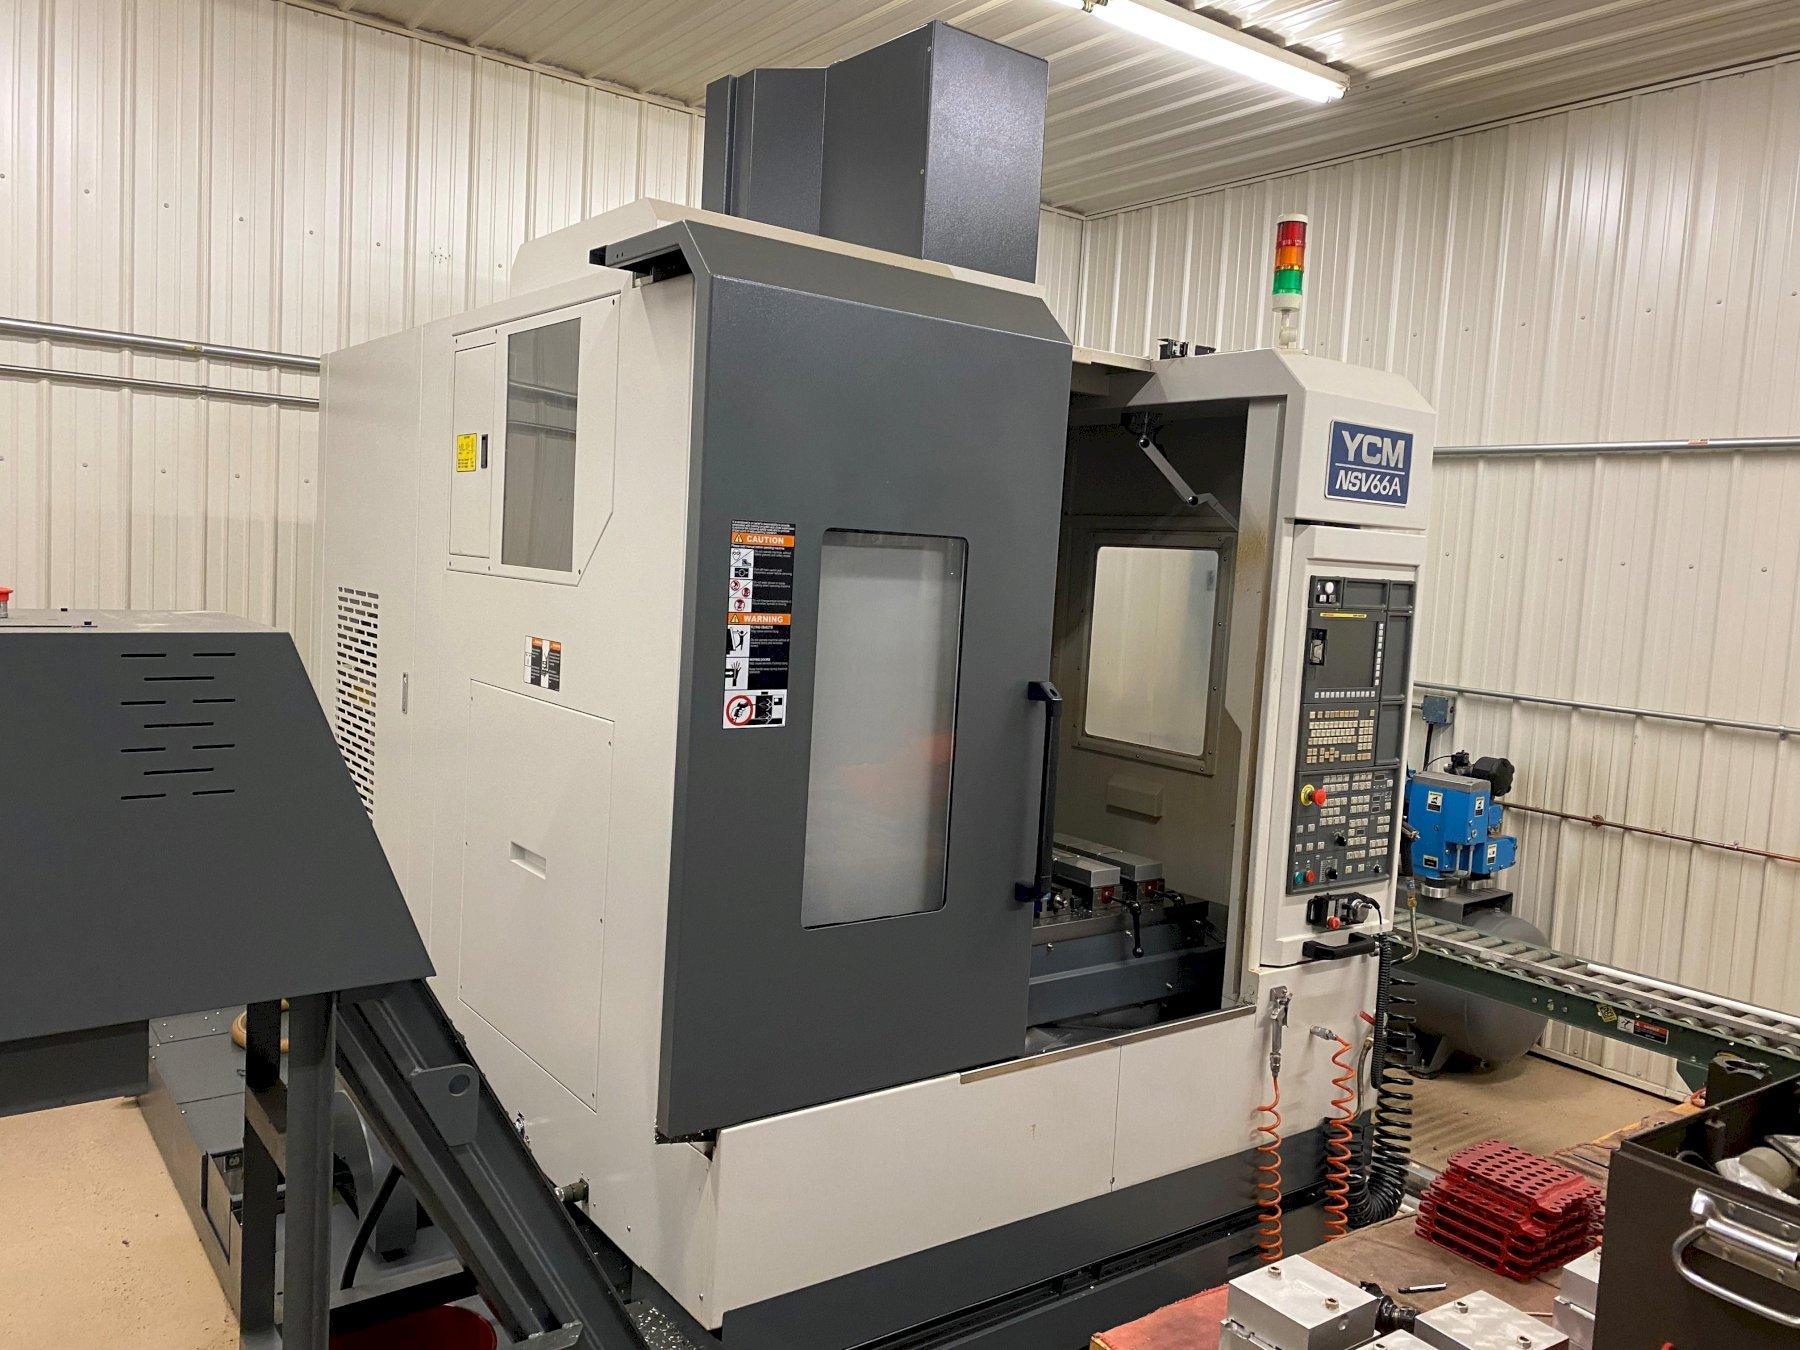 YCM NSV66A CNC Vertical Machining Center For Sale - 2012